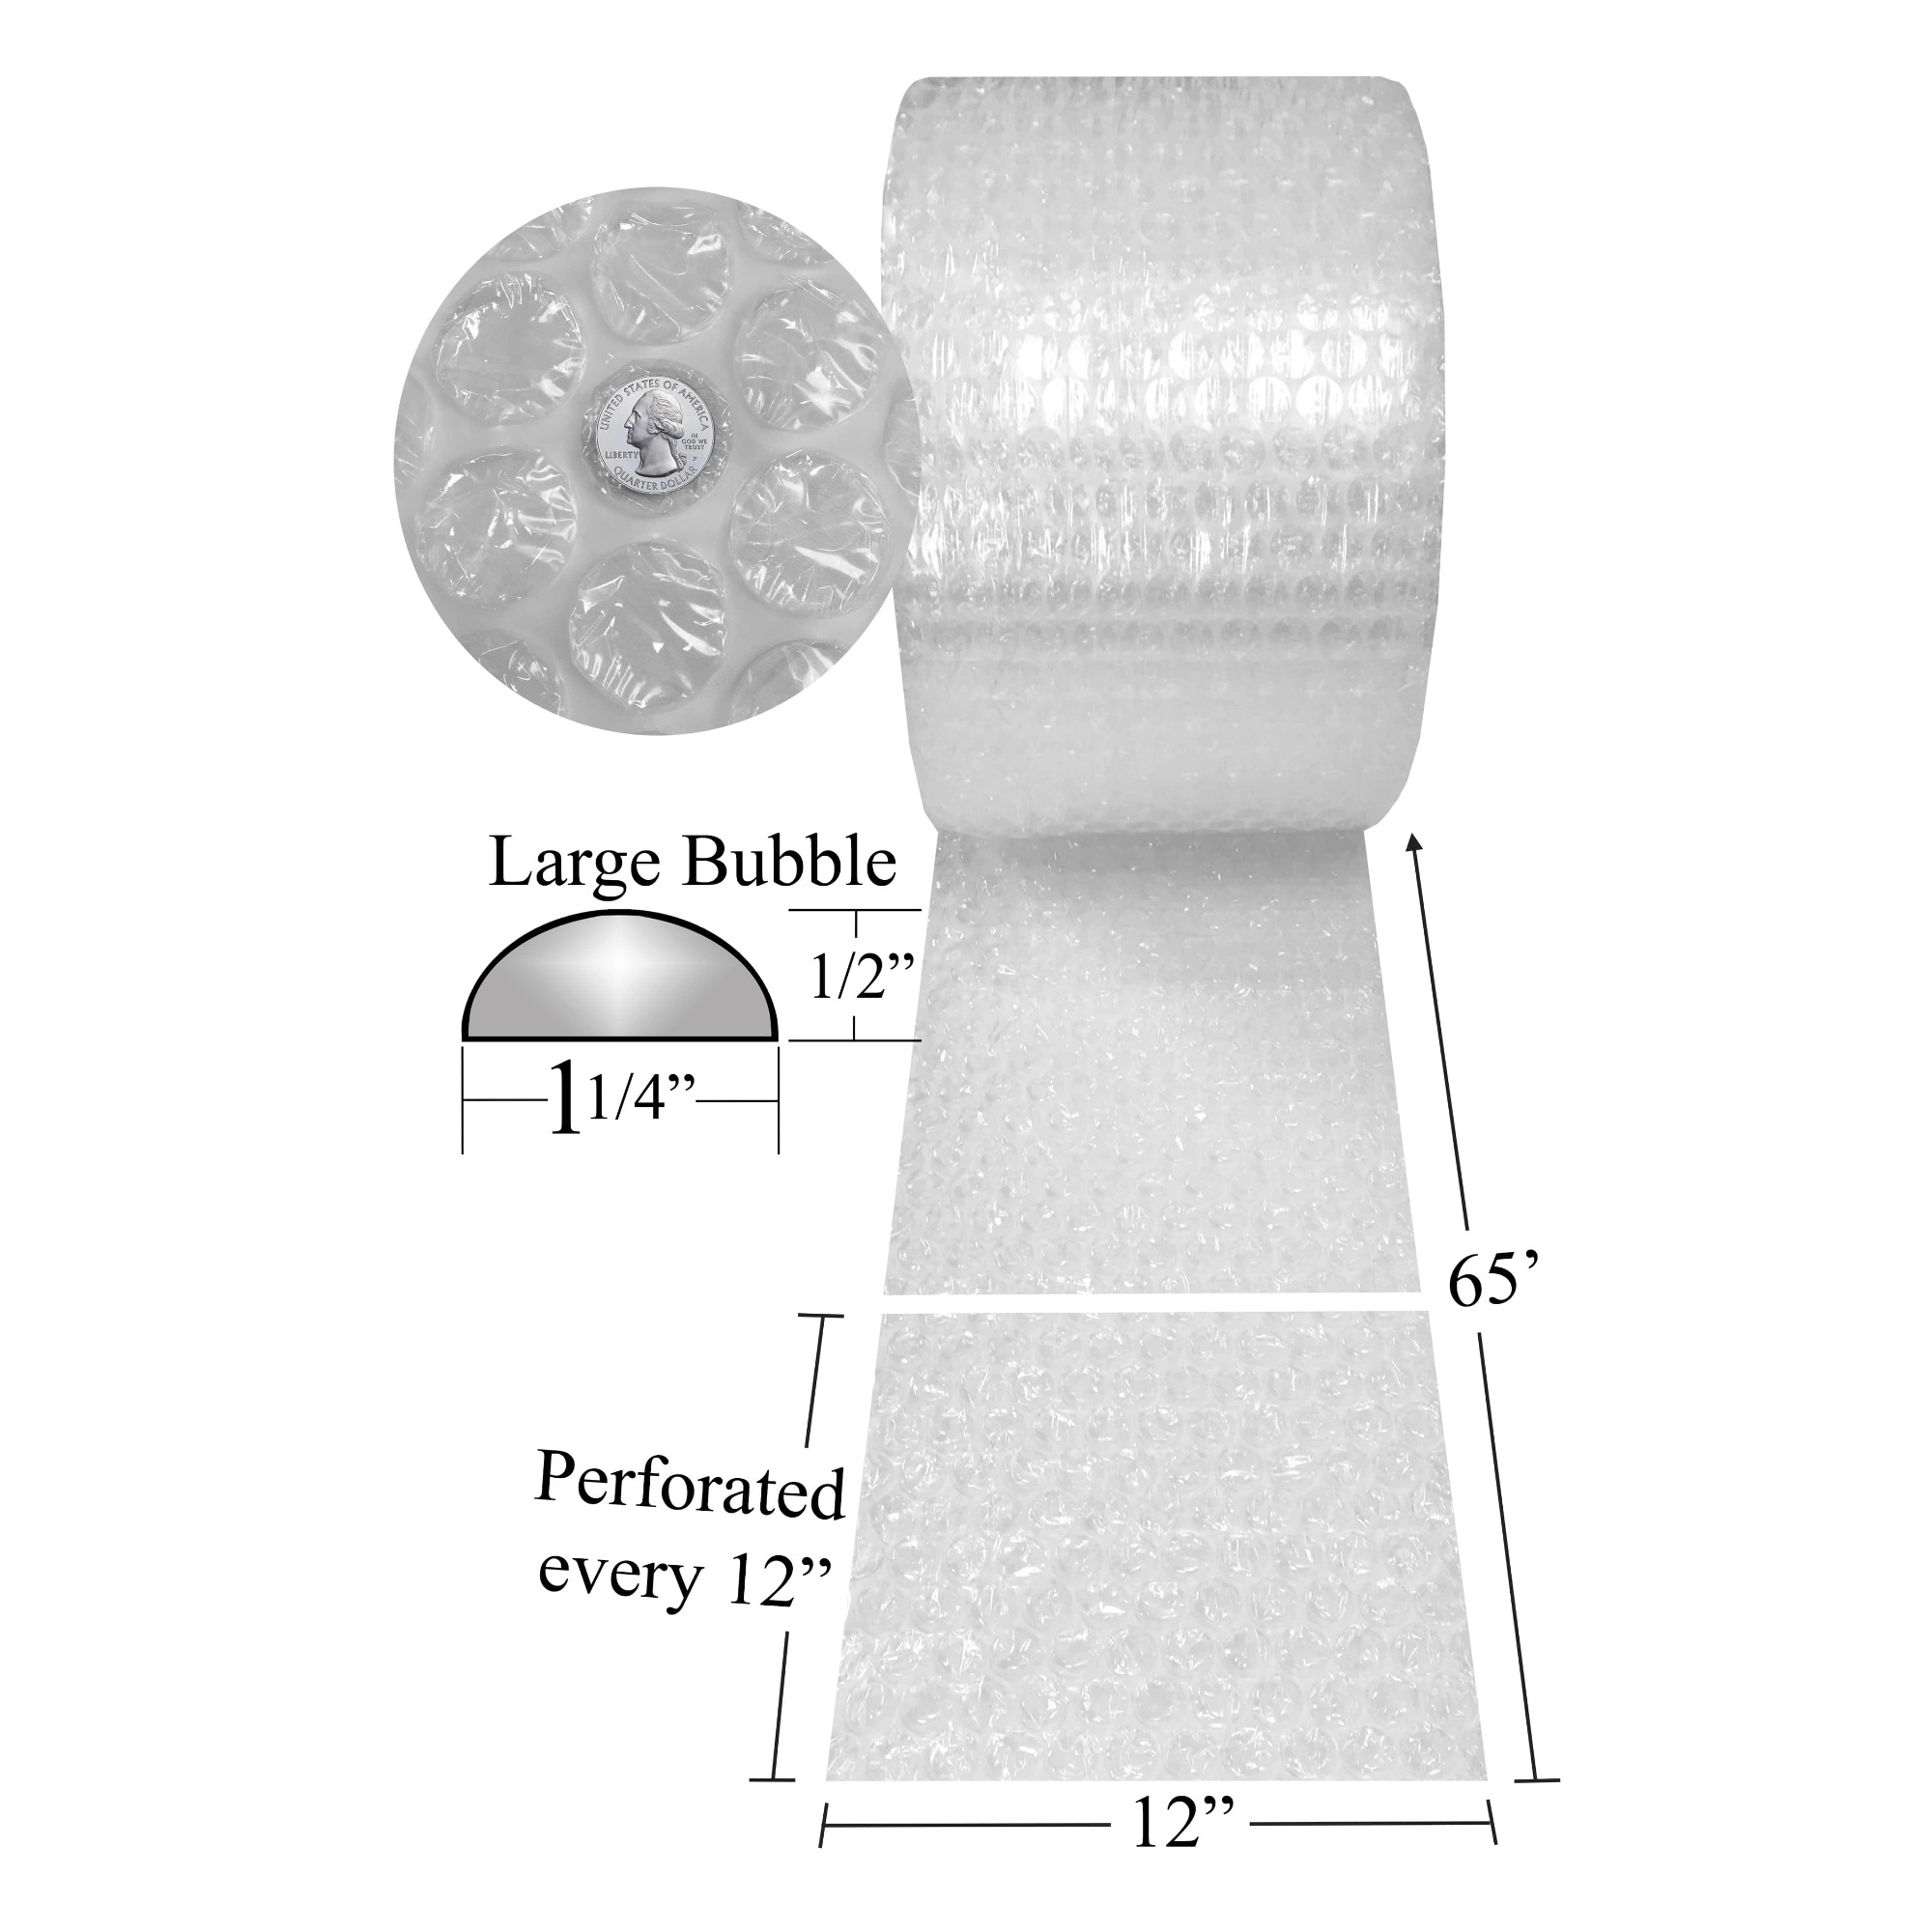 UOFFICE Bubble Cushioning Wrap Roll - 65 ft x 12" Wide - Large 1/2" Bubbles - image 5 of 8